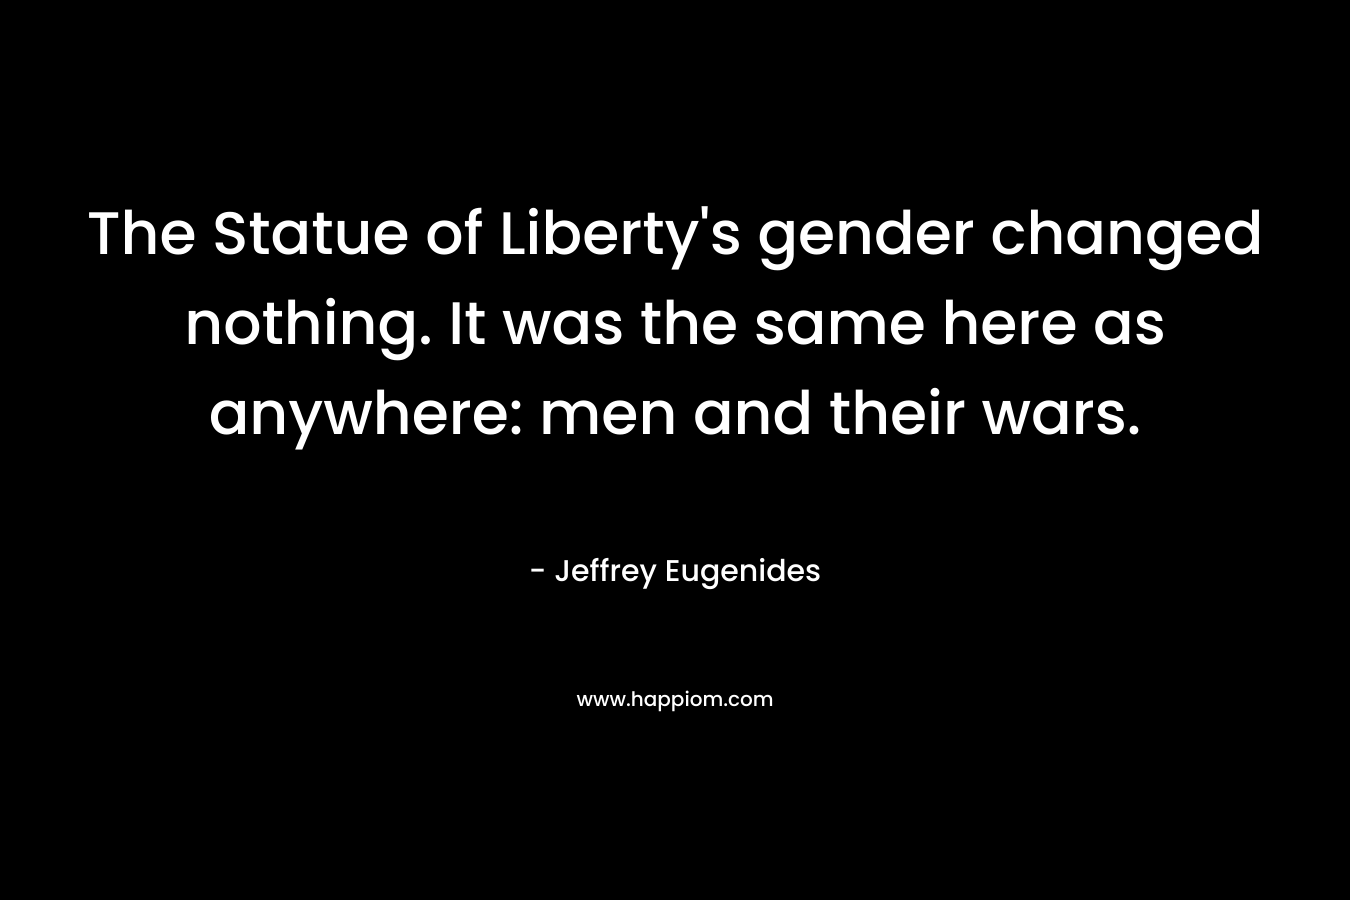 The Statue of Liberty's gender changed nothing. It was the same here as anywhere: men and their wars.